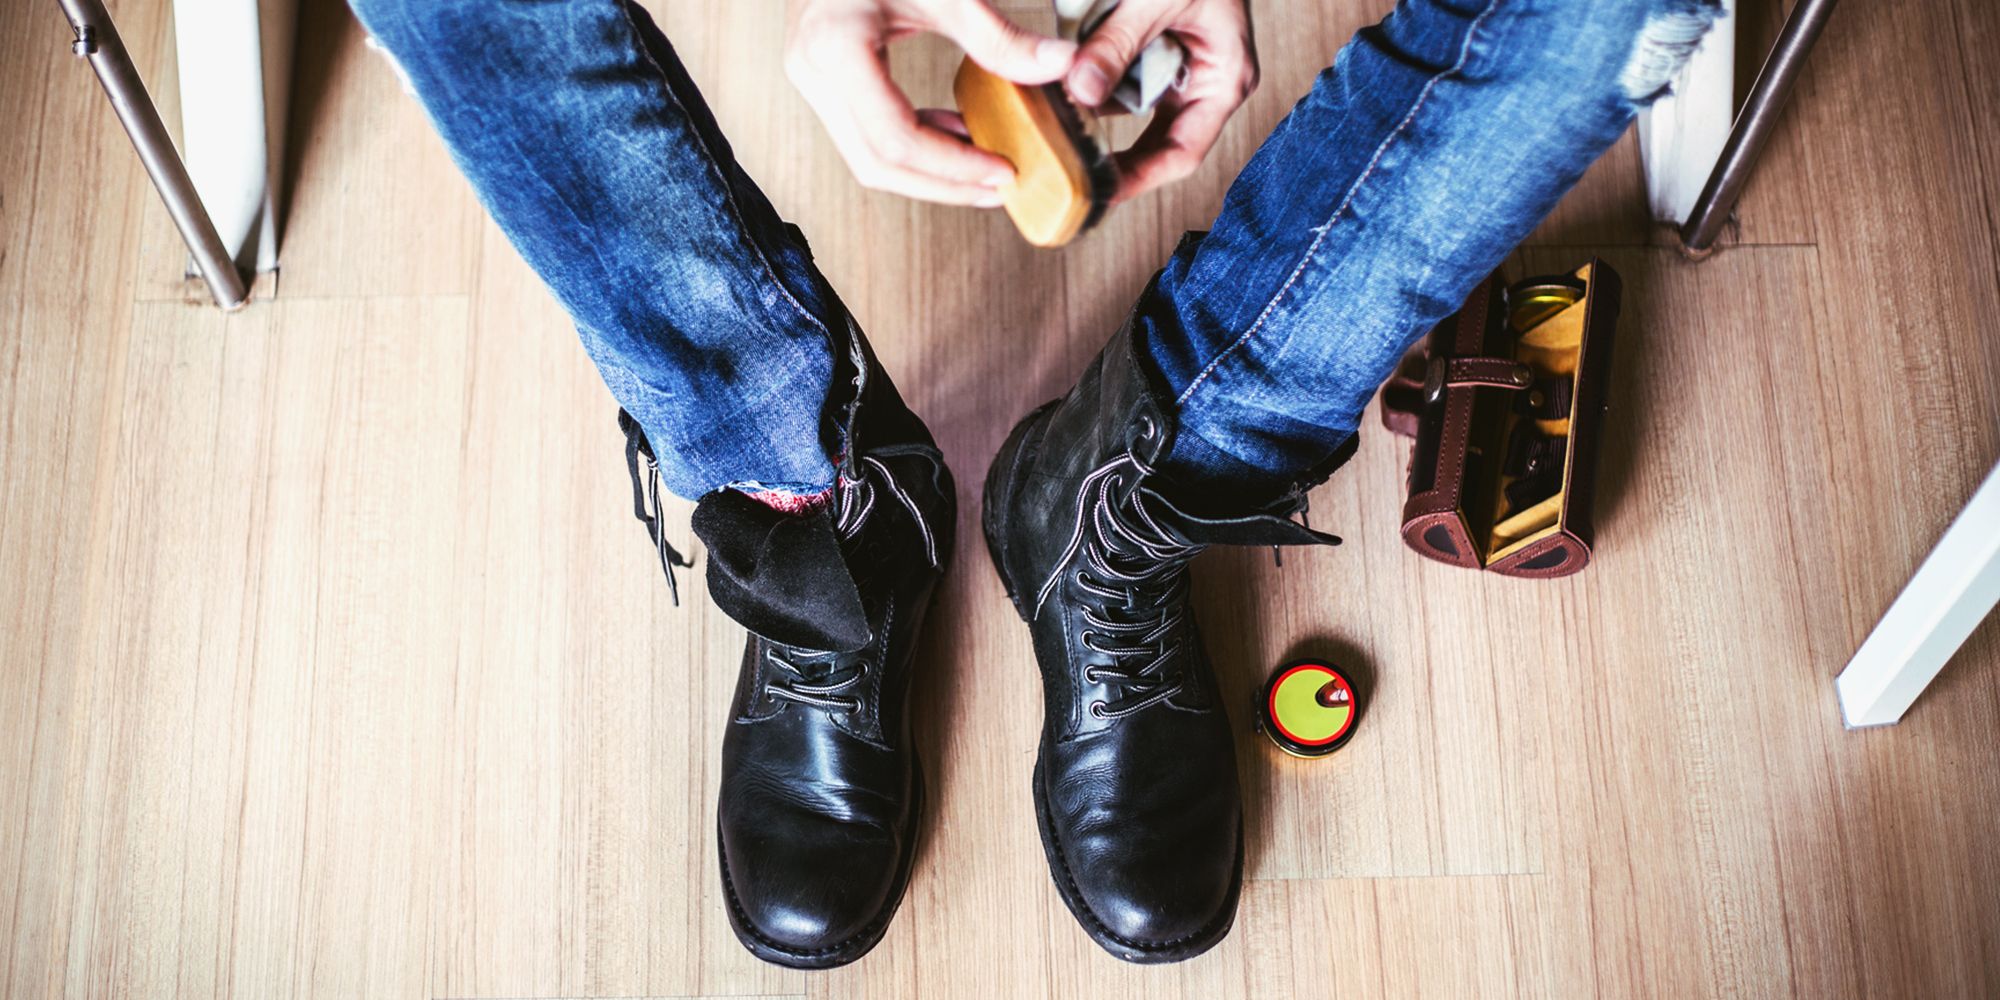 4 Best Shoe Polishes for Shining Up Your Leather - How to Use Shoe Polish  the Right Way